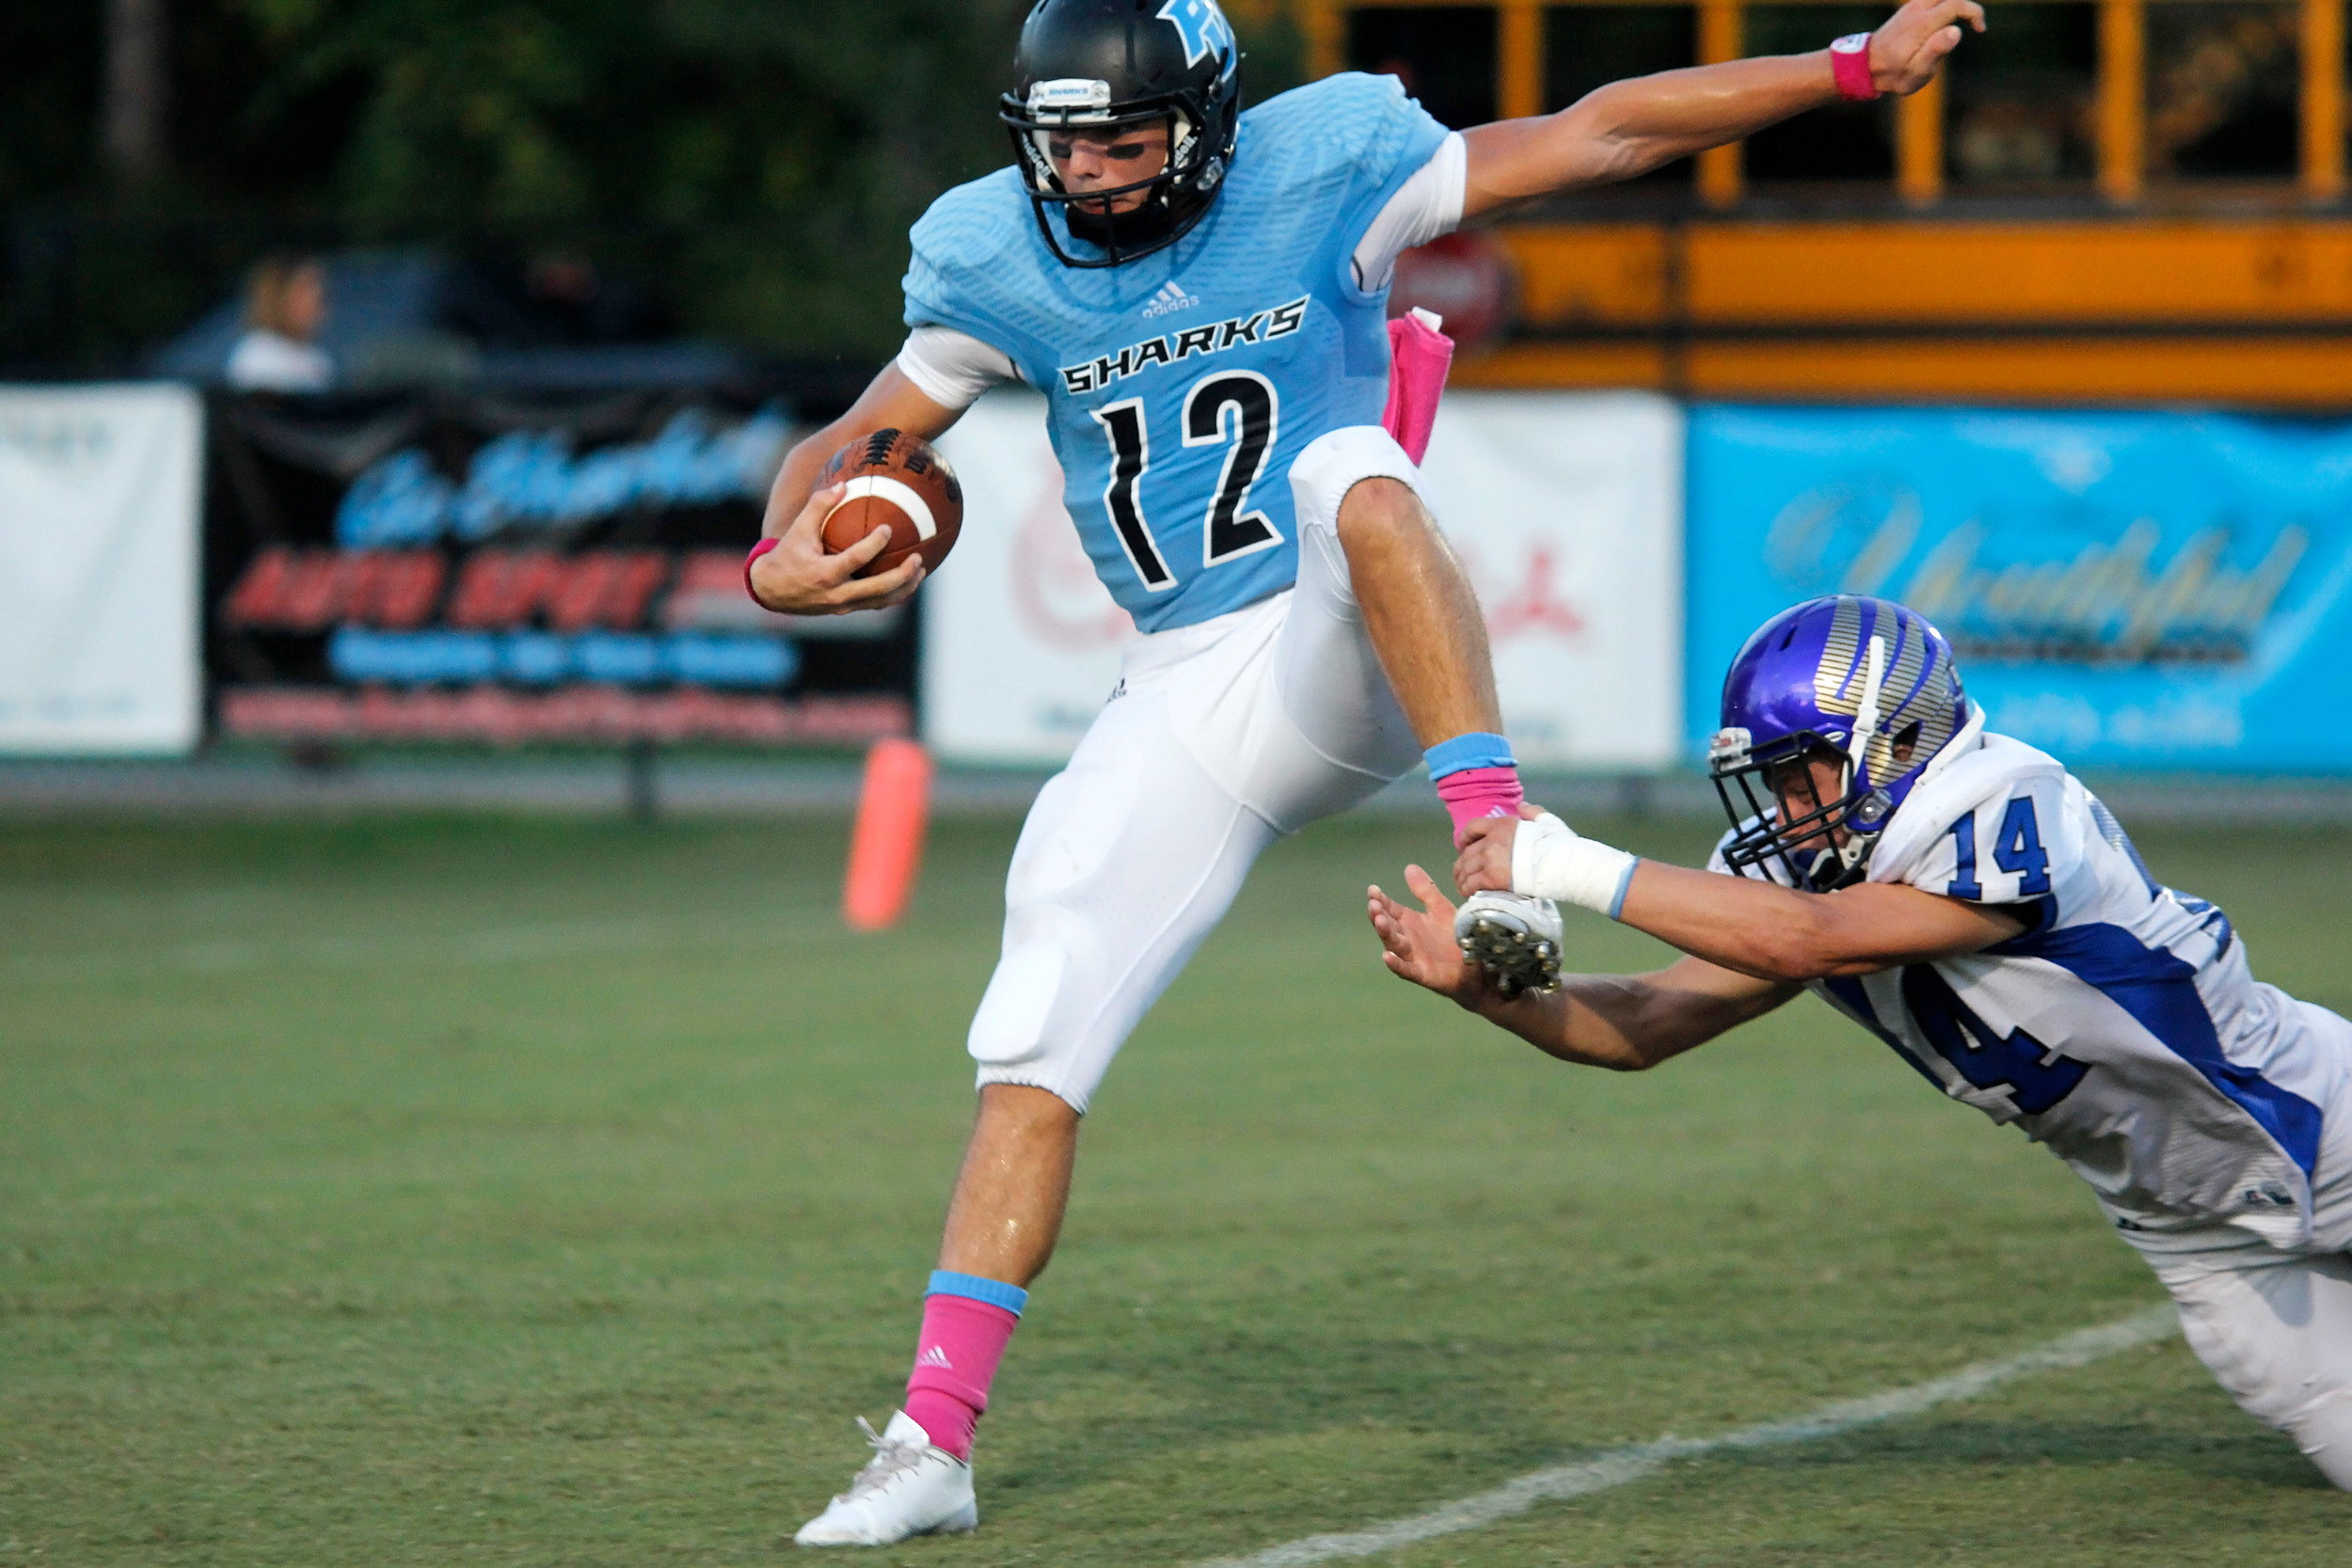 The Sharks’ Nick Tronti runs out of the grasp of a Menendez tackler for a touchdown